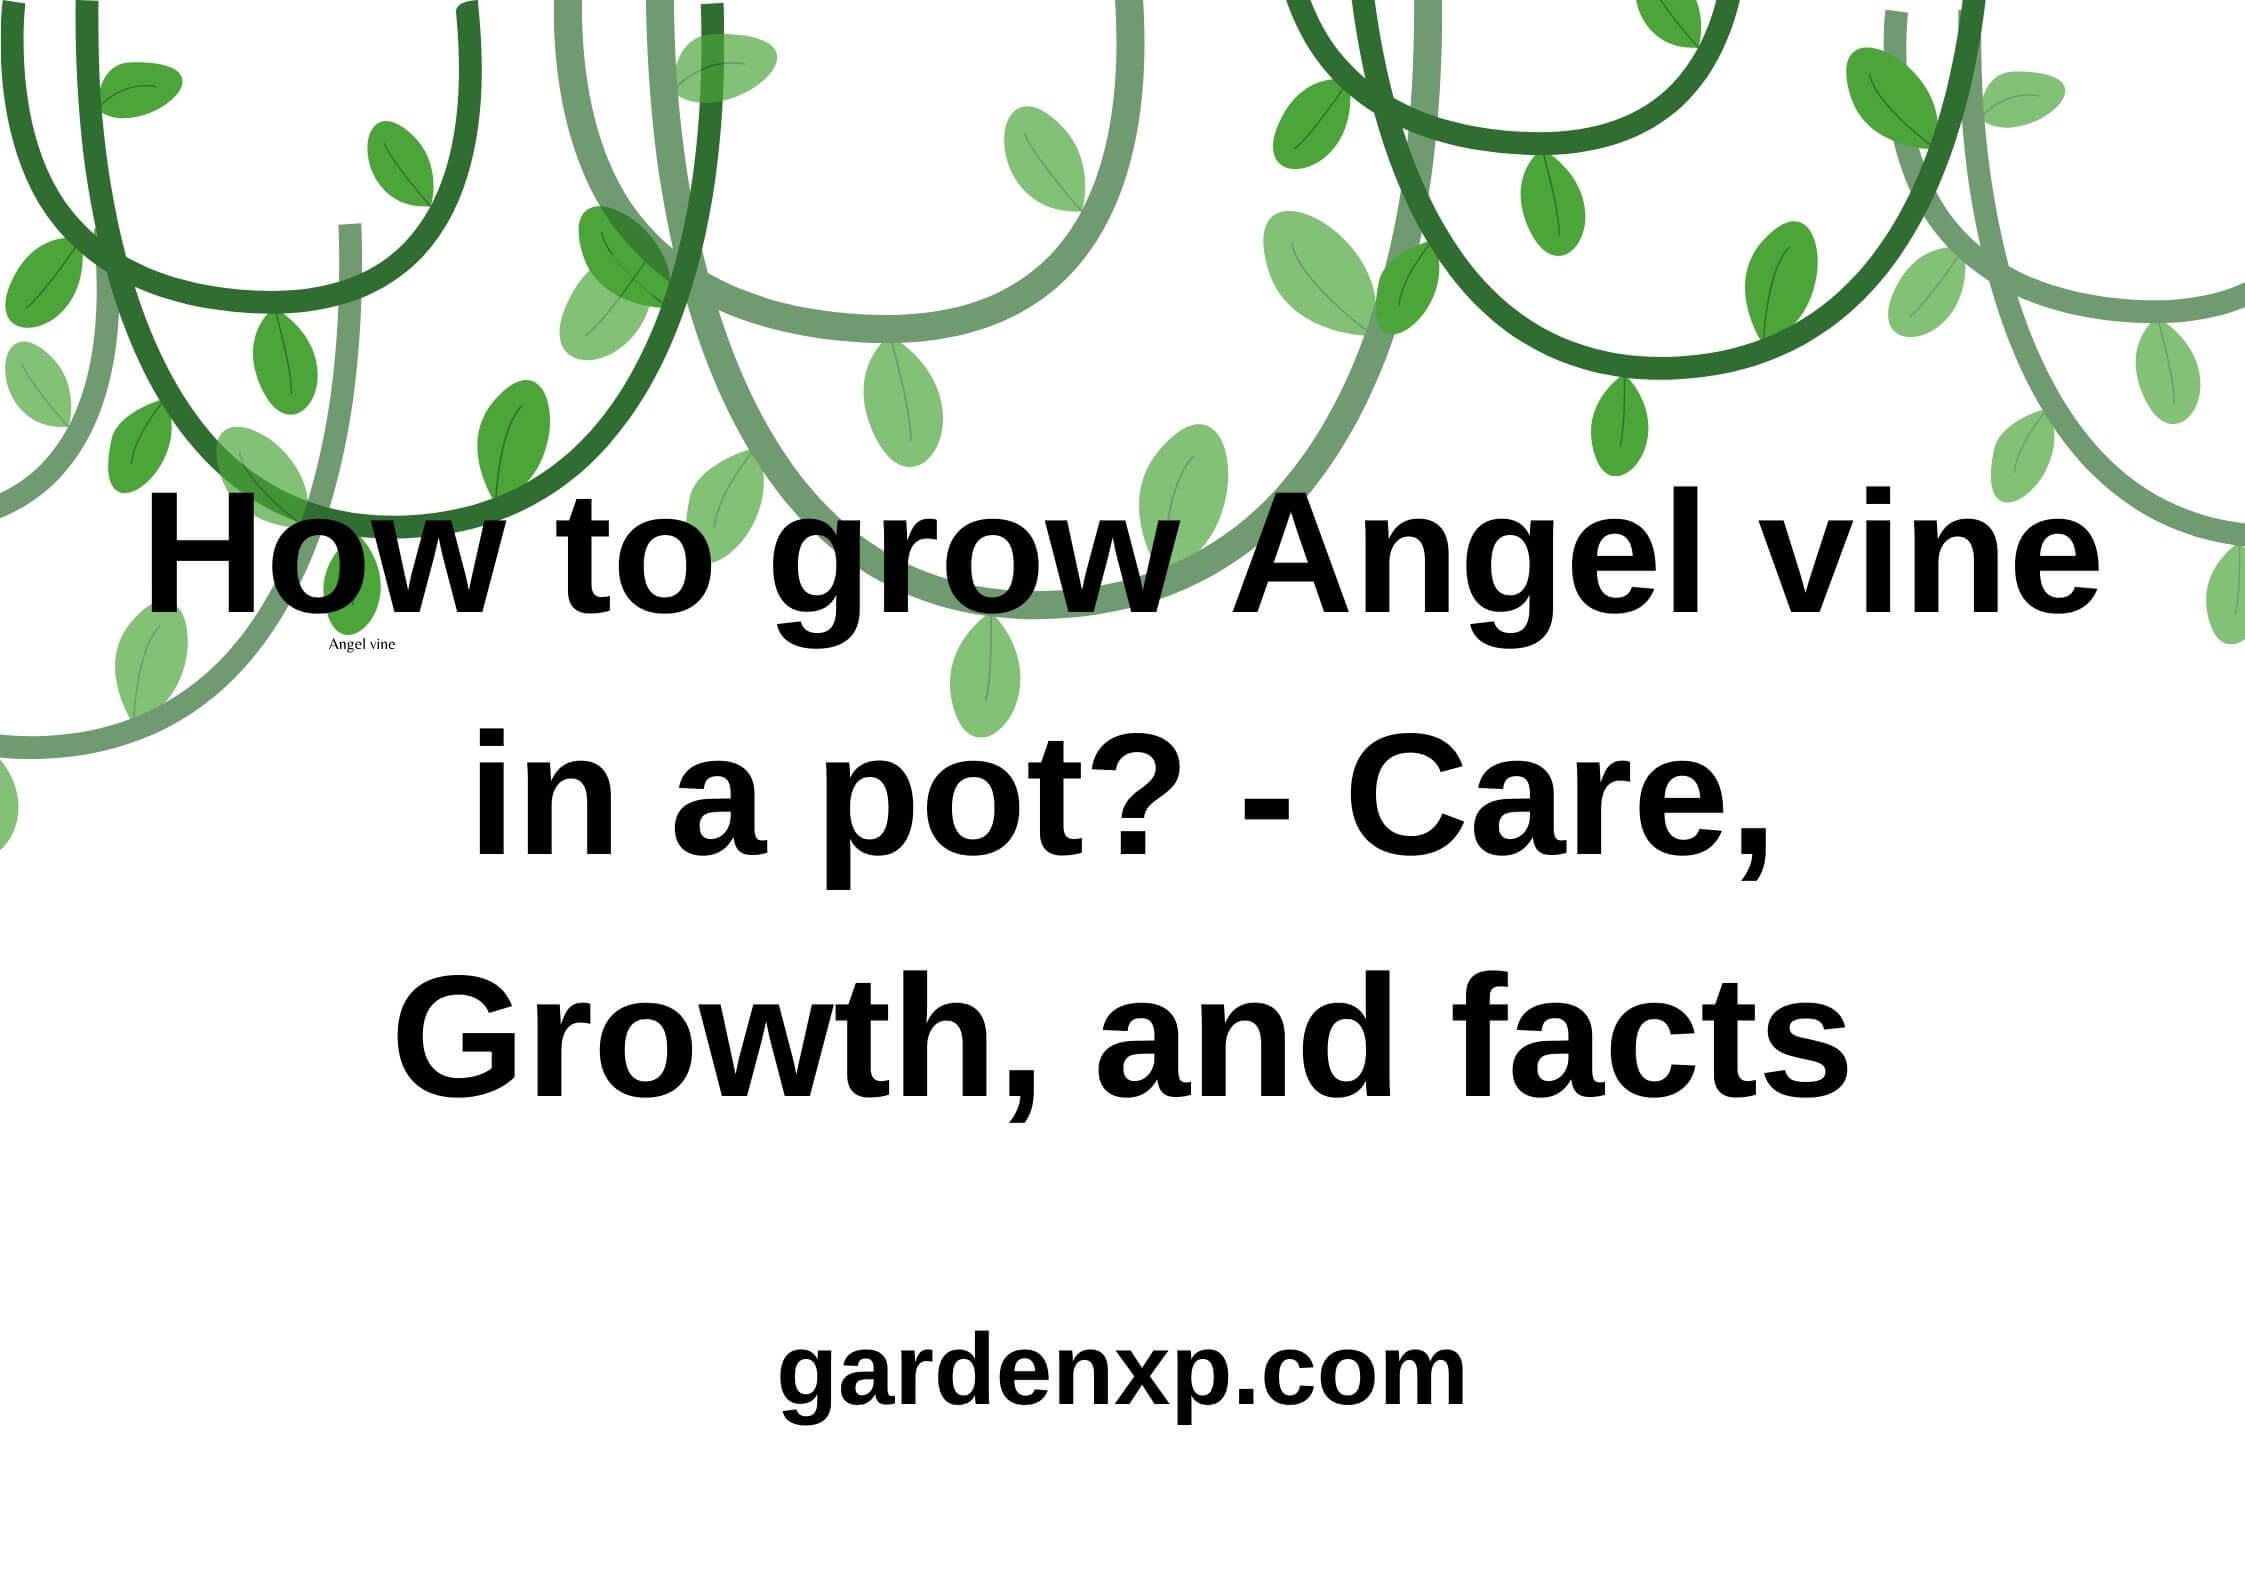 How to grow Angel vine in a pot - Care, Growth, and facts